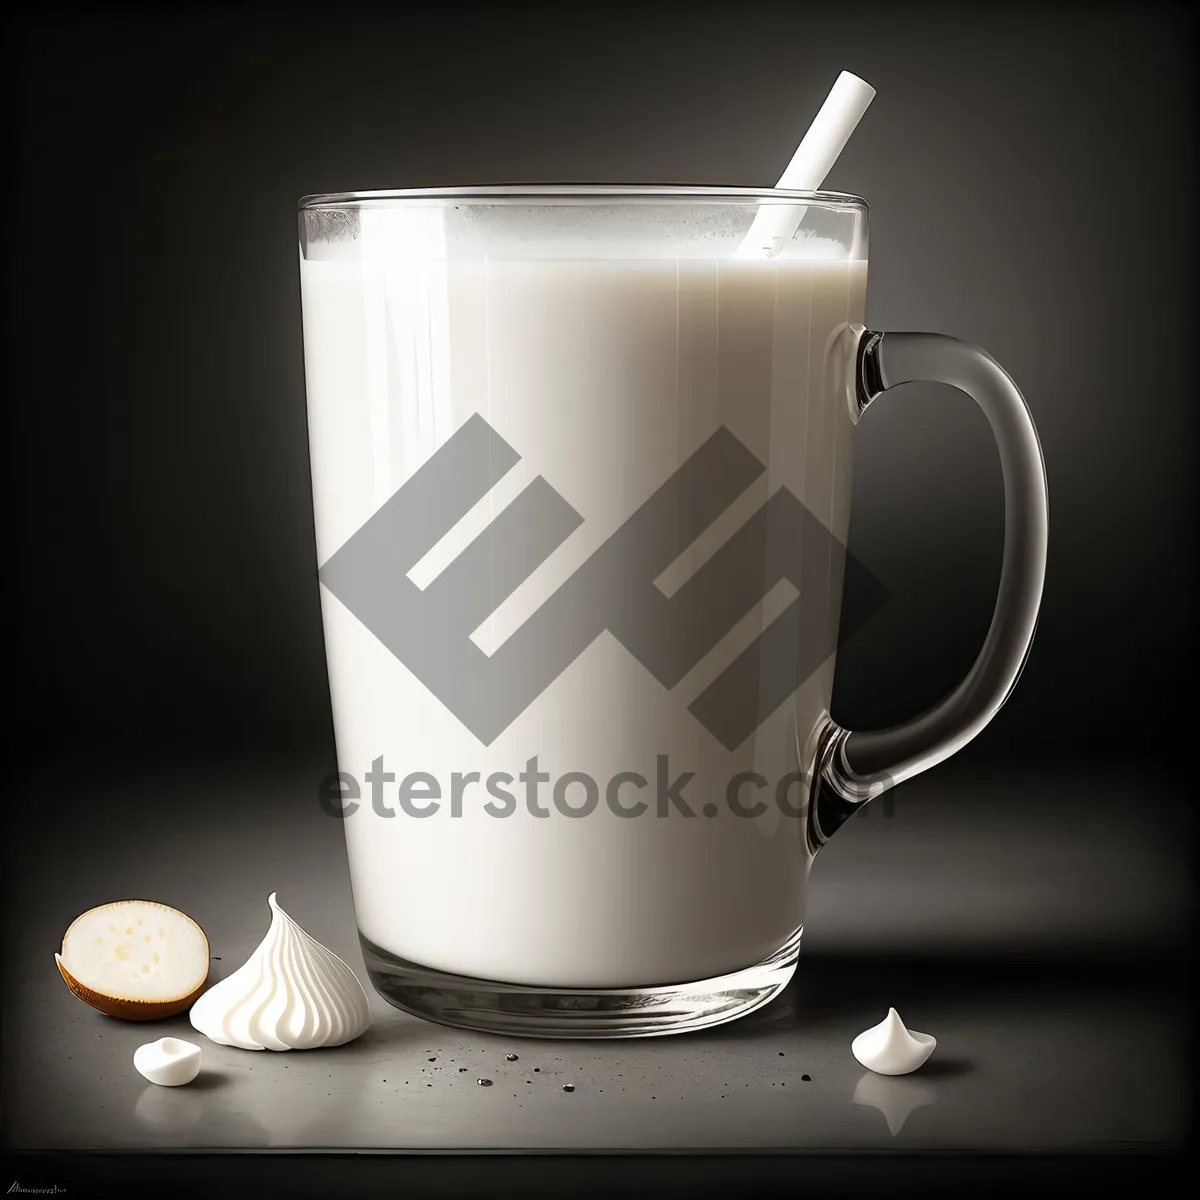 Picture of Delicious Morning Cup of Coffee